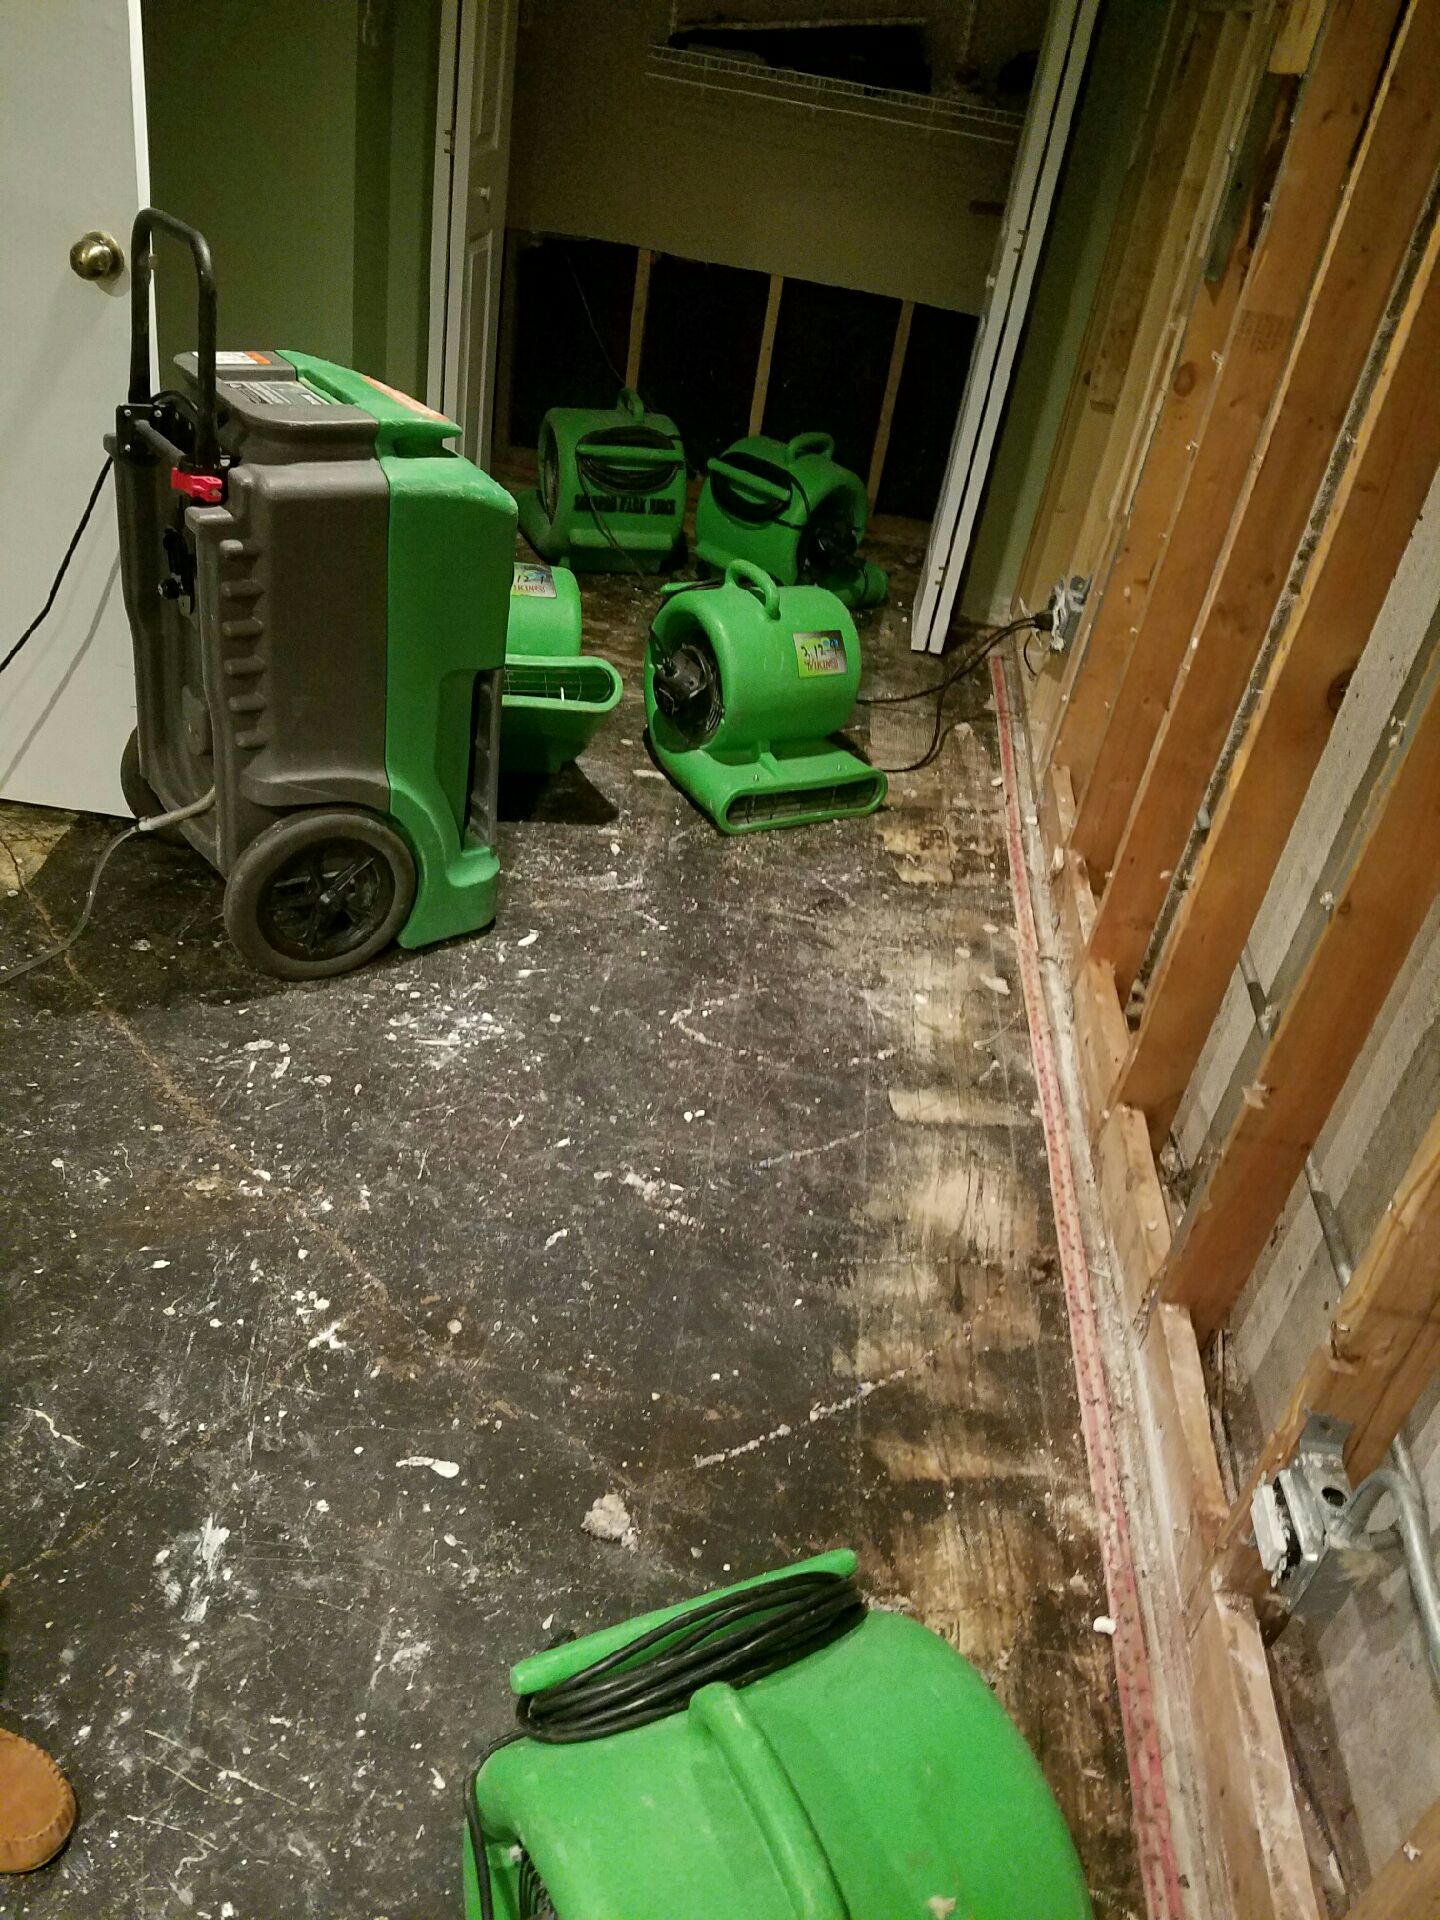 SERVPRO of Park Ridge, North Rosemont and South Des Plaines is Here to Help with any water damage restoration needed.